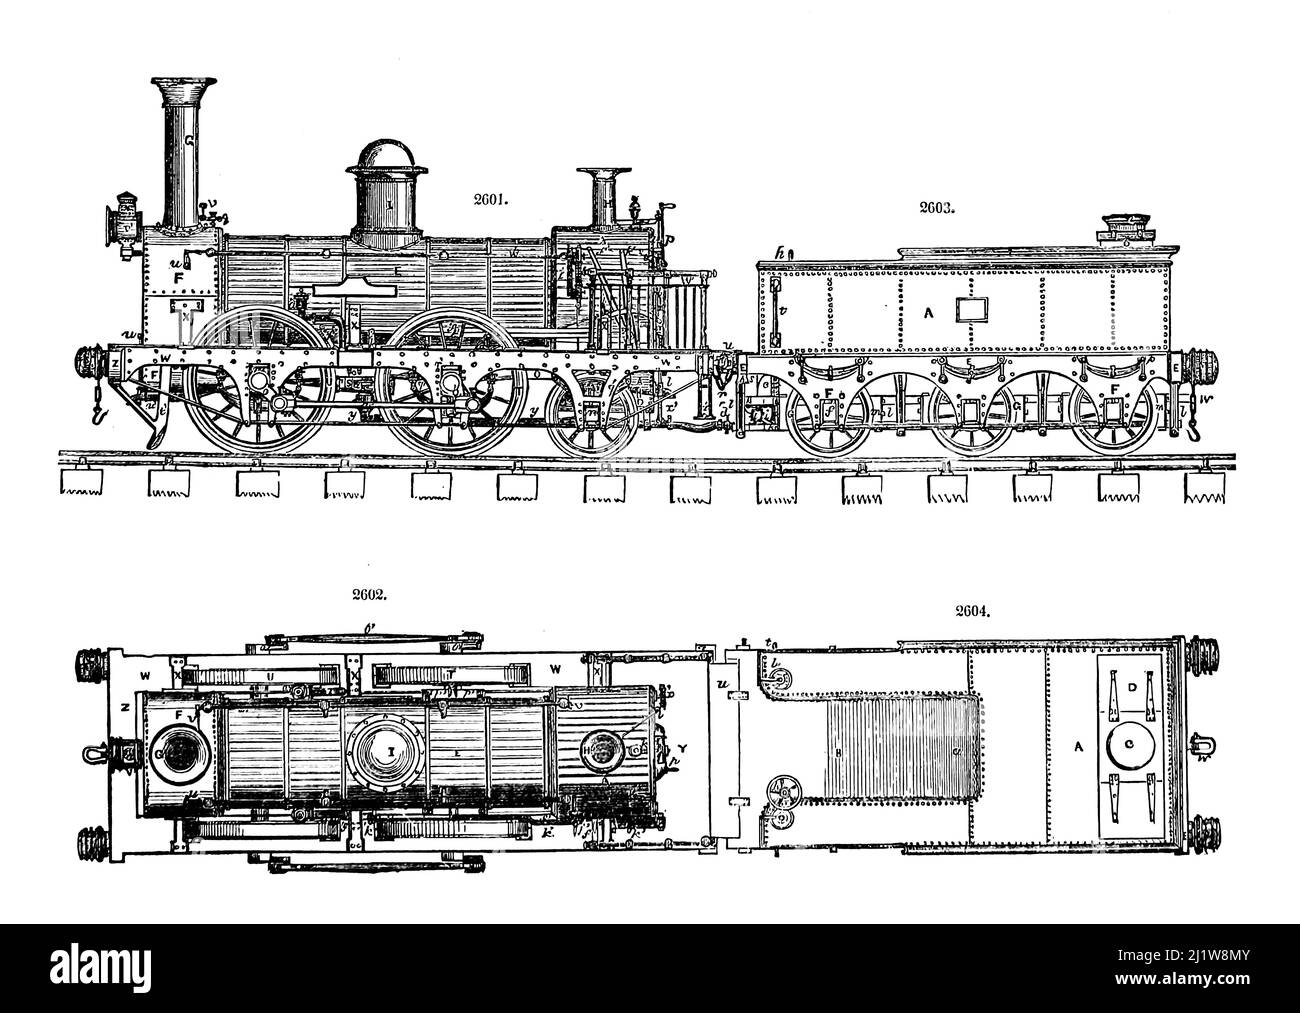 Locomotive Engine, Sketch from Appleton's dictionary of machines, mechanics, engine-work, and engineering : illustrated with four thousand engravings on wood ; in two volumes by D. Appleton and Company Published New York : D. Appleton and Co 1873 Stock Photo